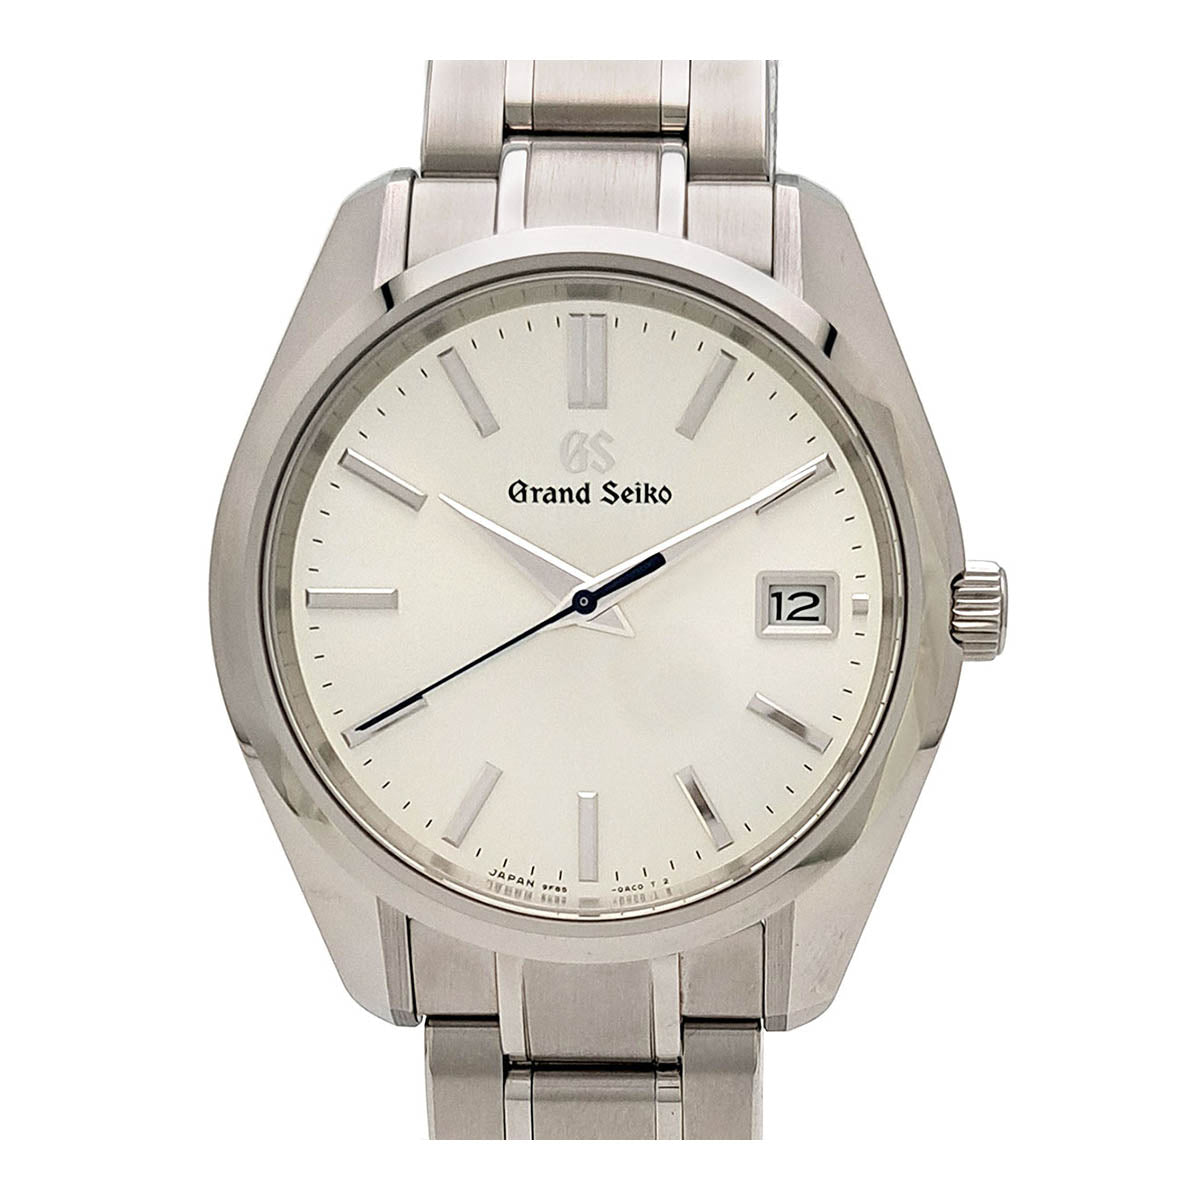 SEIKO Grand Seiko Heritage Collection SBGP001 Quartz Stainless Steel Men's Watch (Excellent Pre-Owned) SBGP001